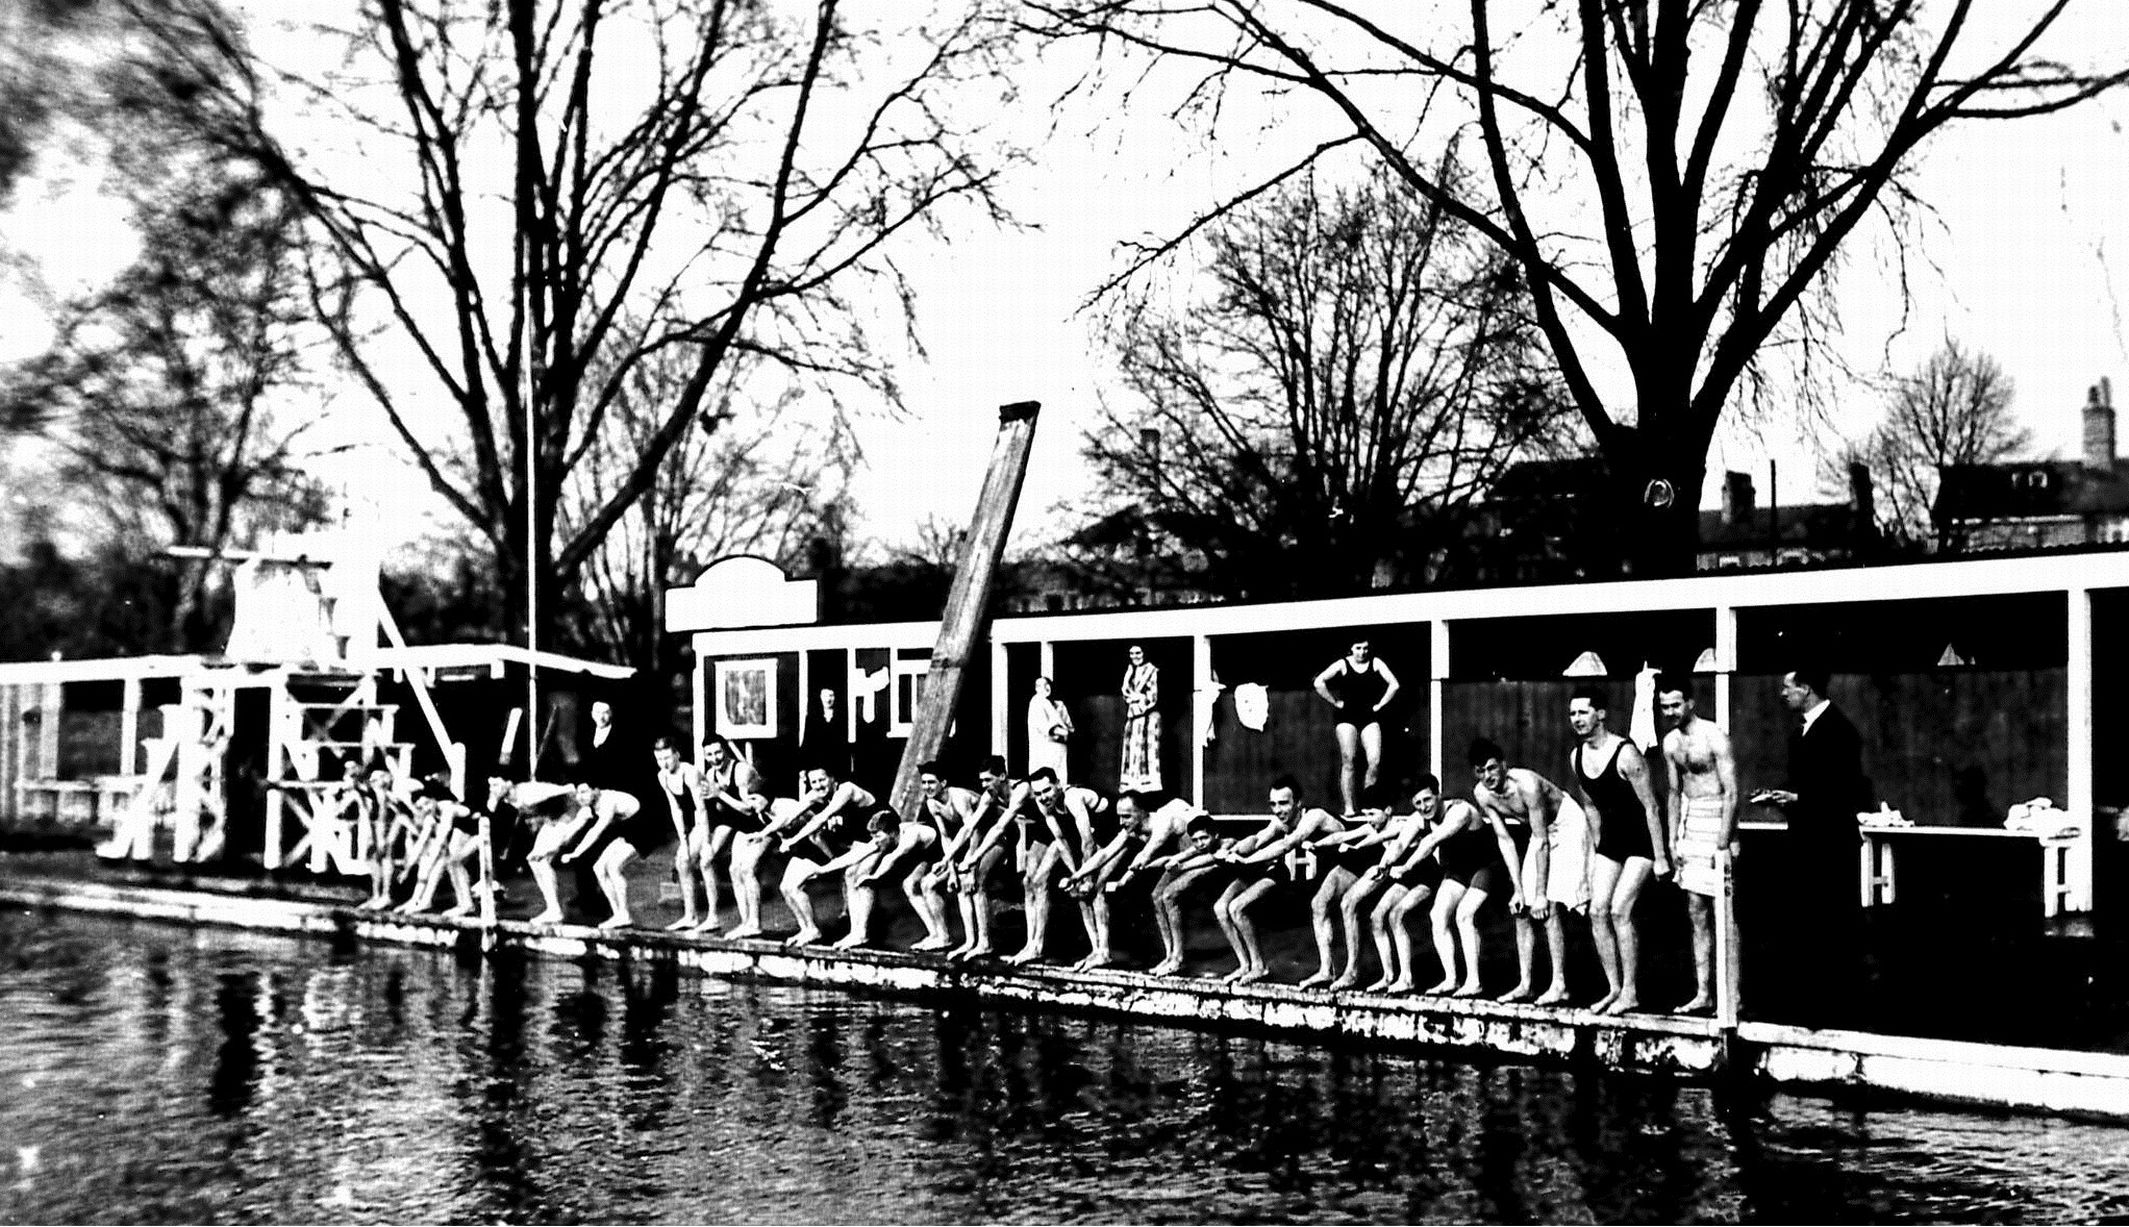 Black and white photo of swimmers from the 1920s